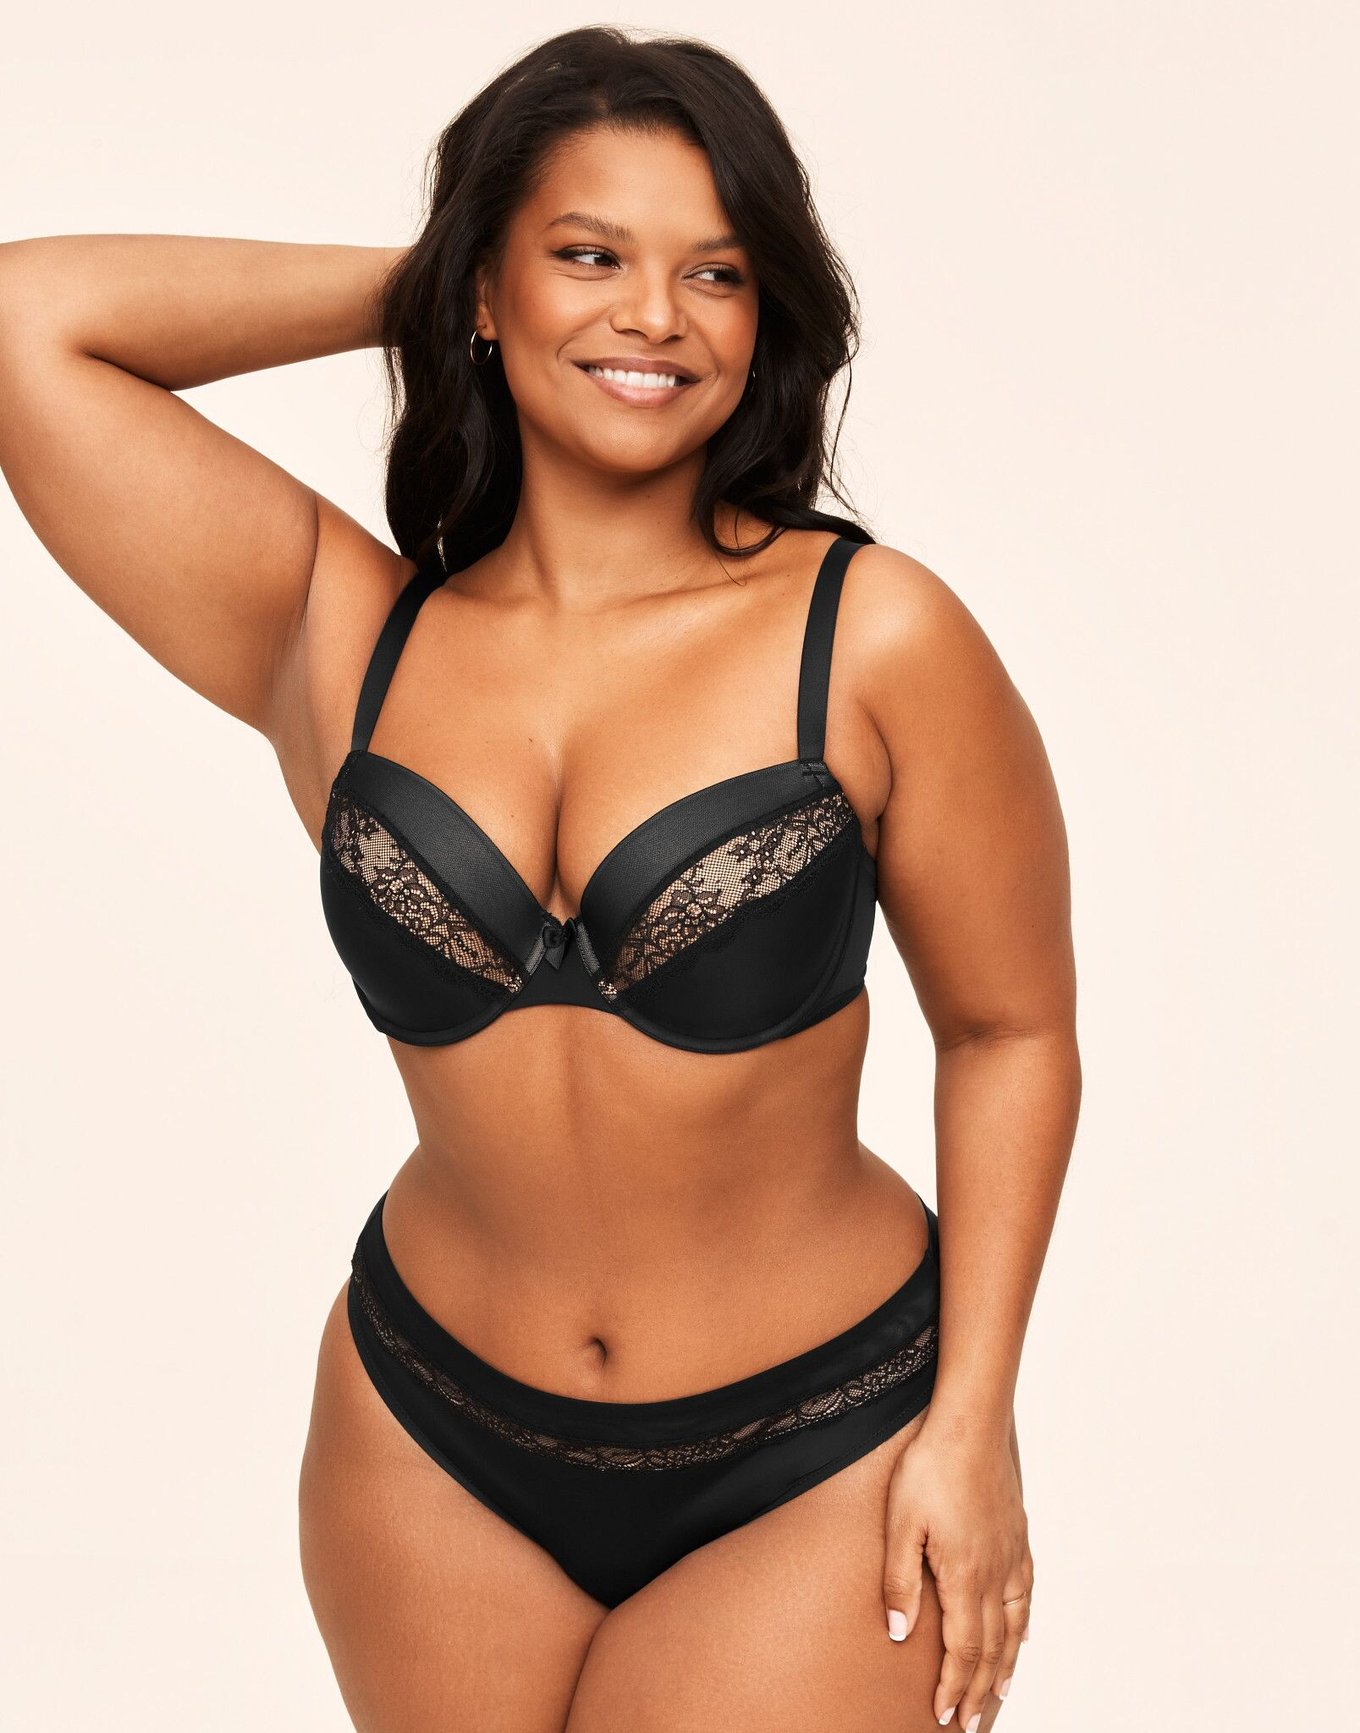 Adored by Adore Me Women's Bella Brazilian Underwear, Sizes up to 3XL 